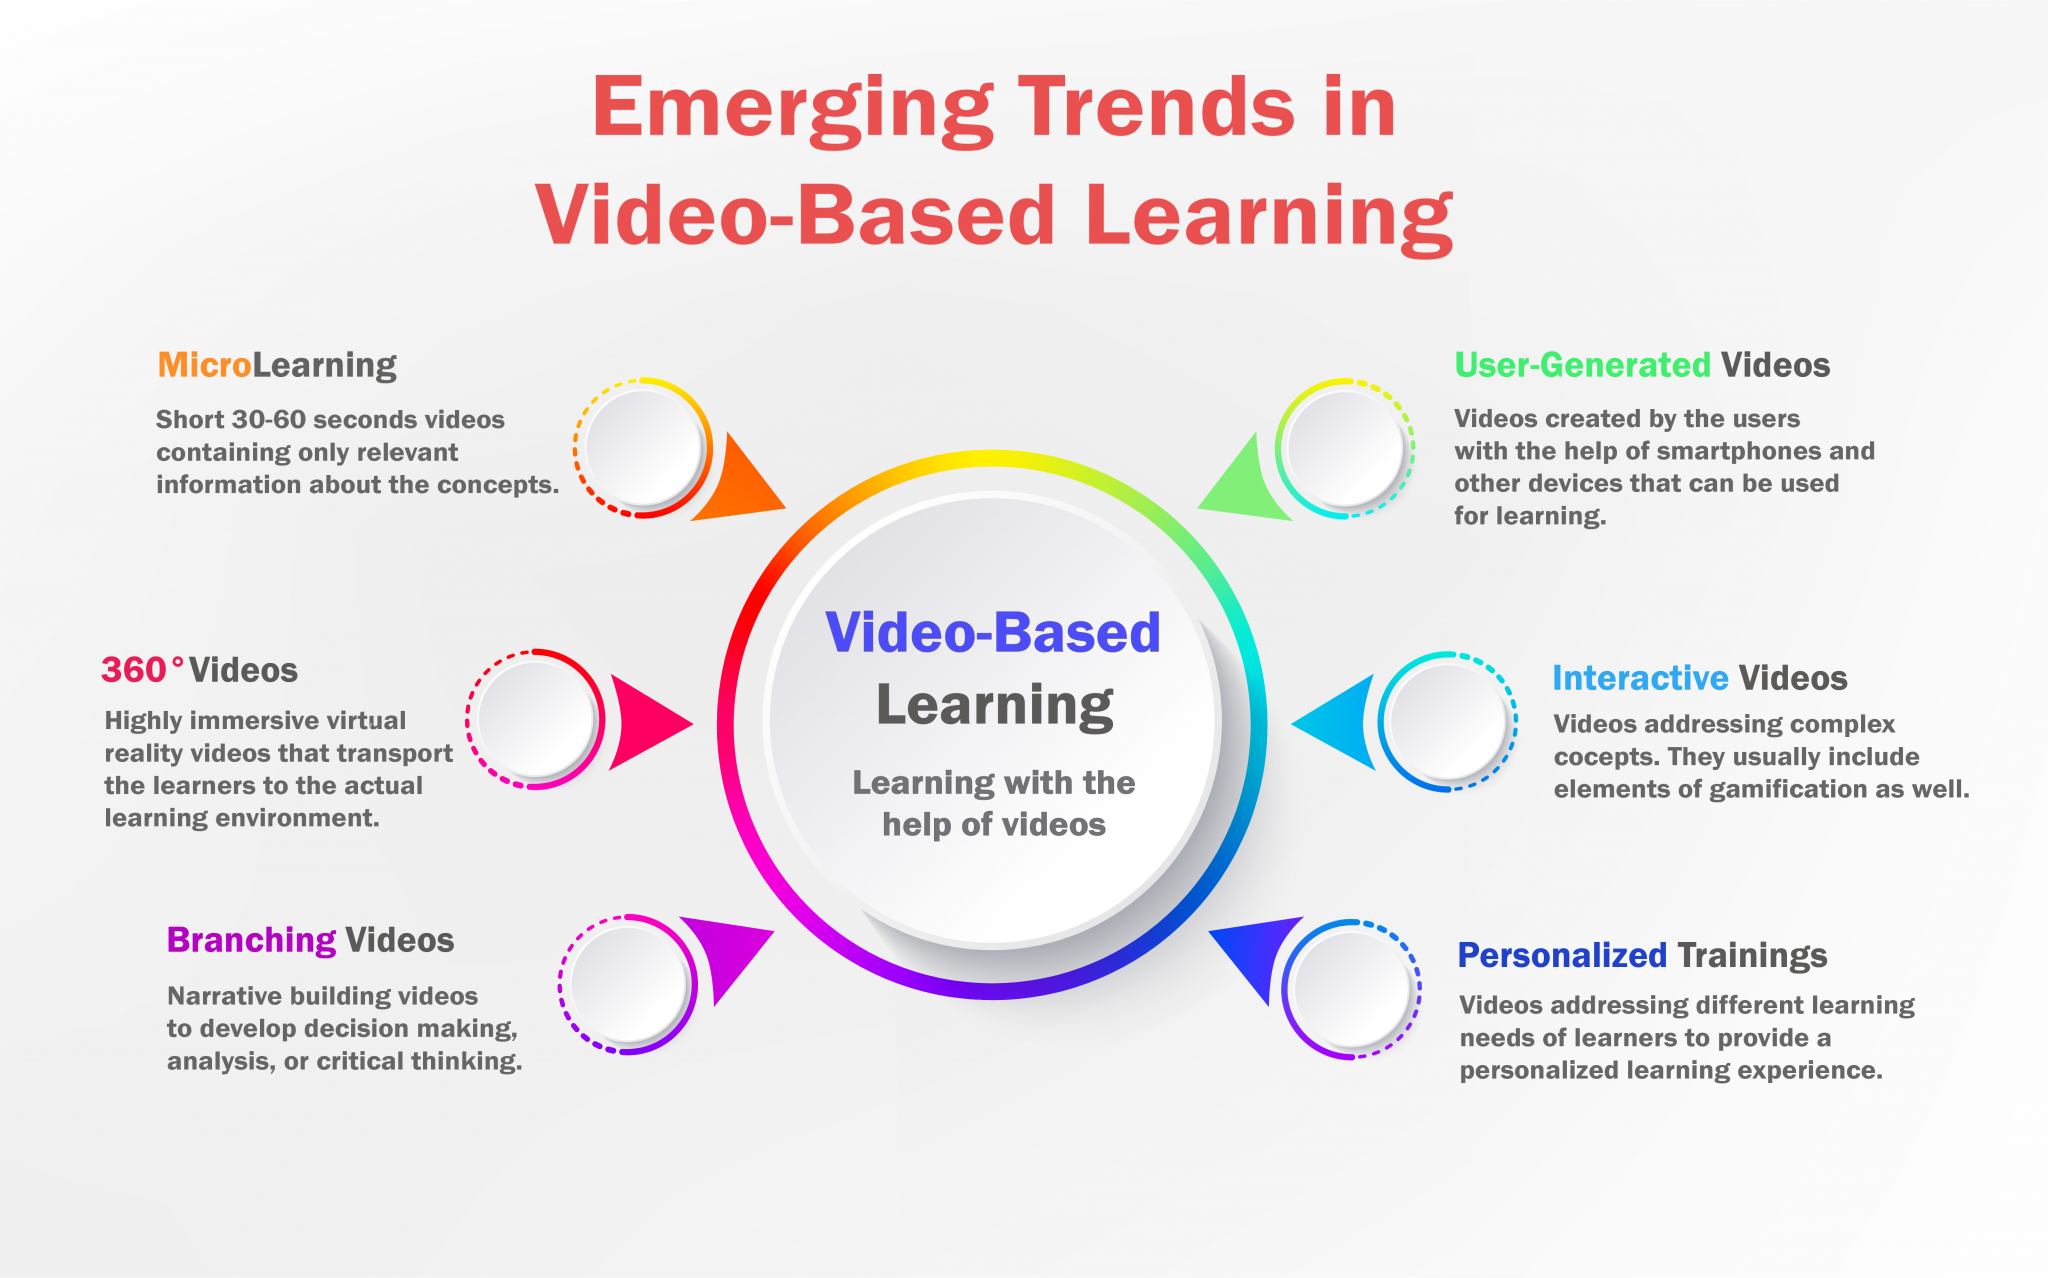 Emerging Trends in Video-Based Learning